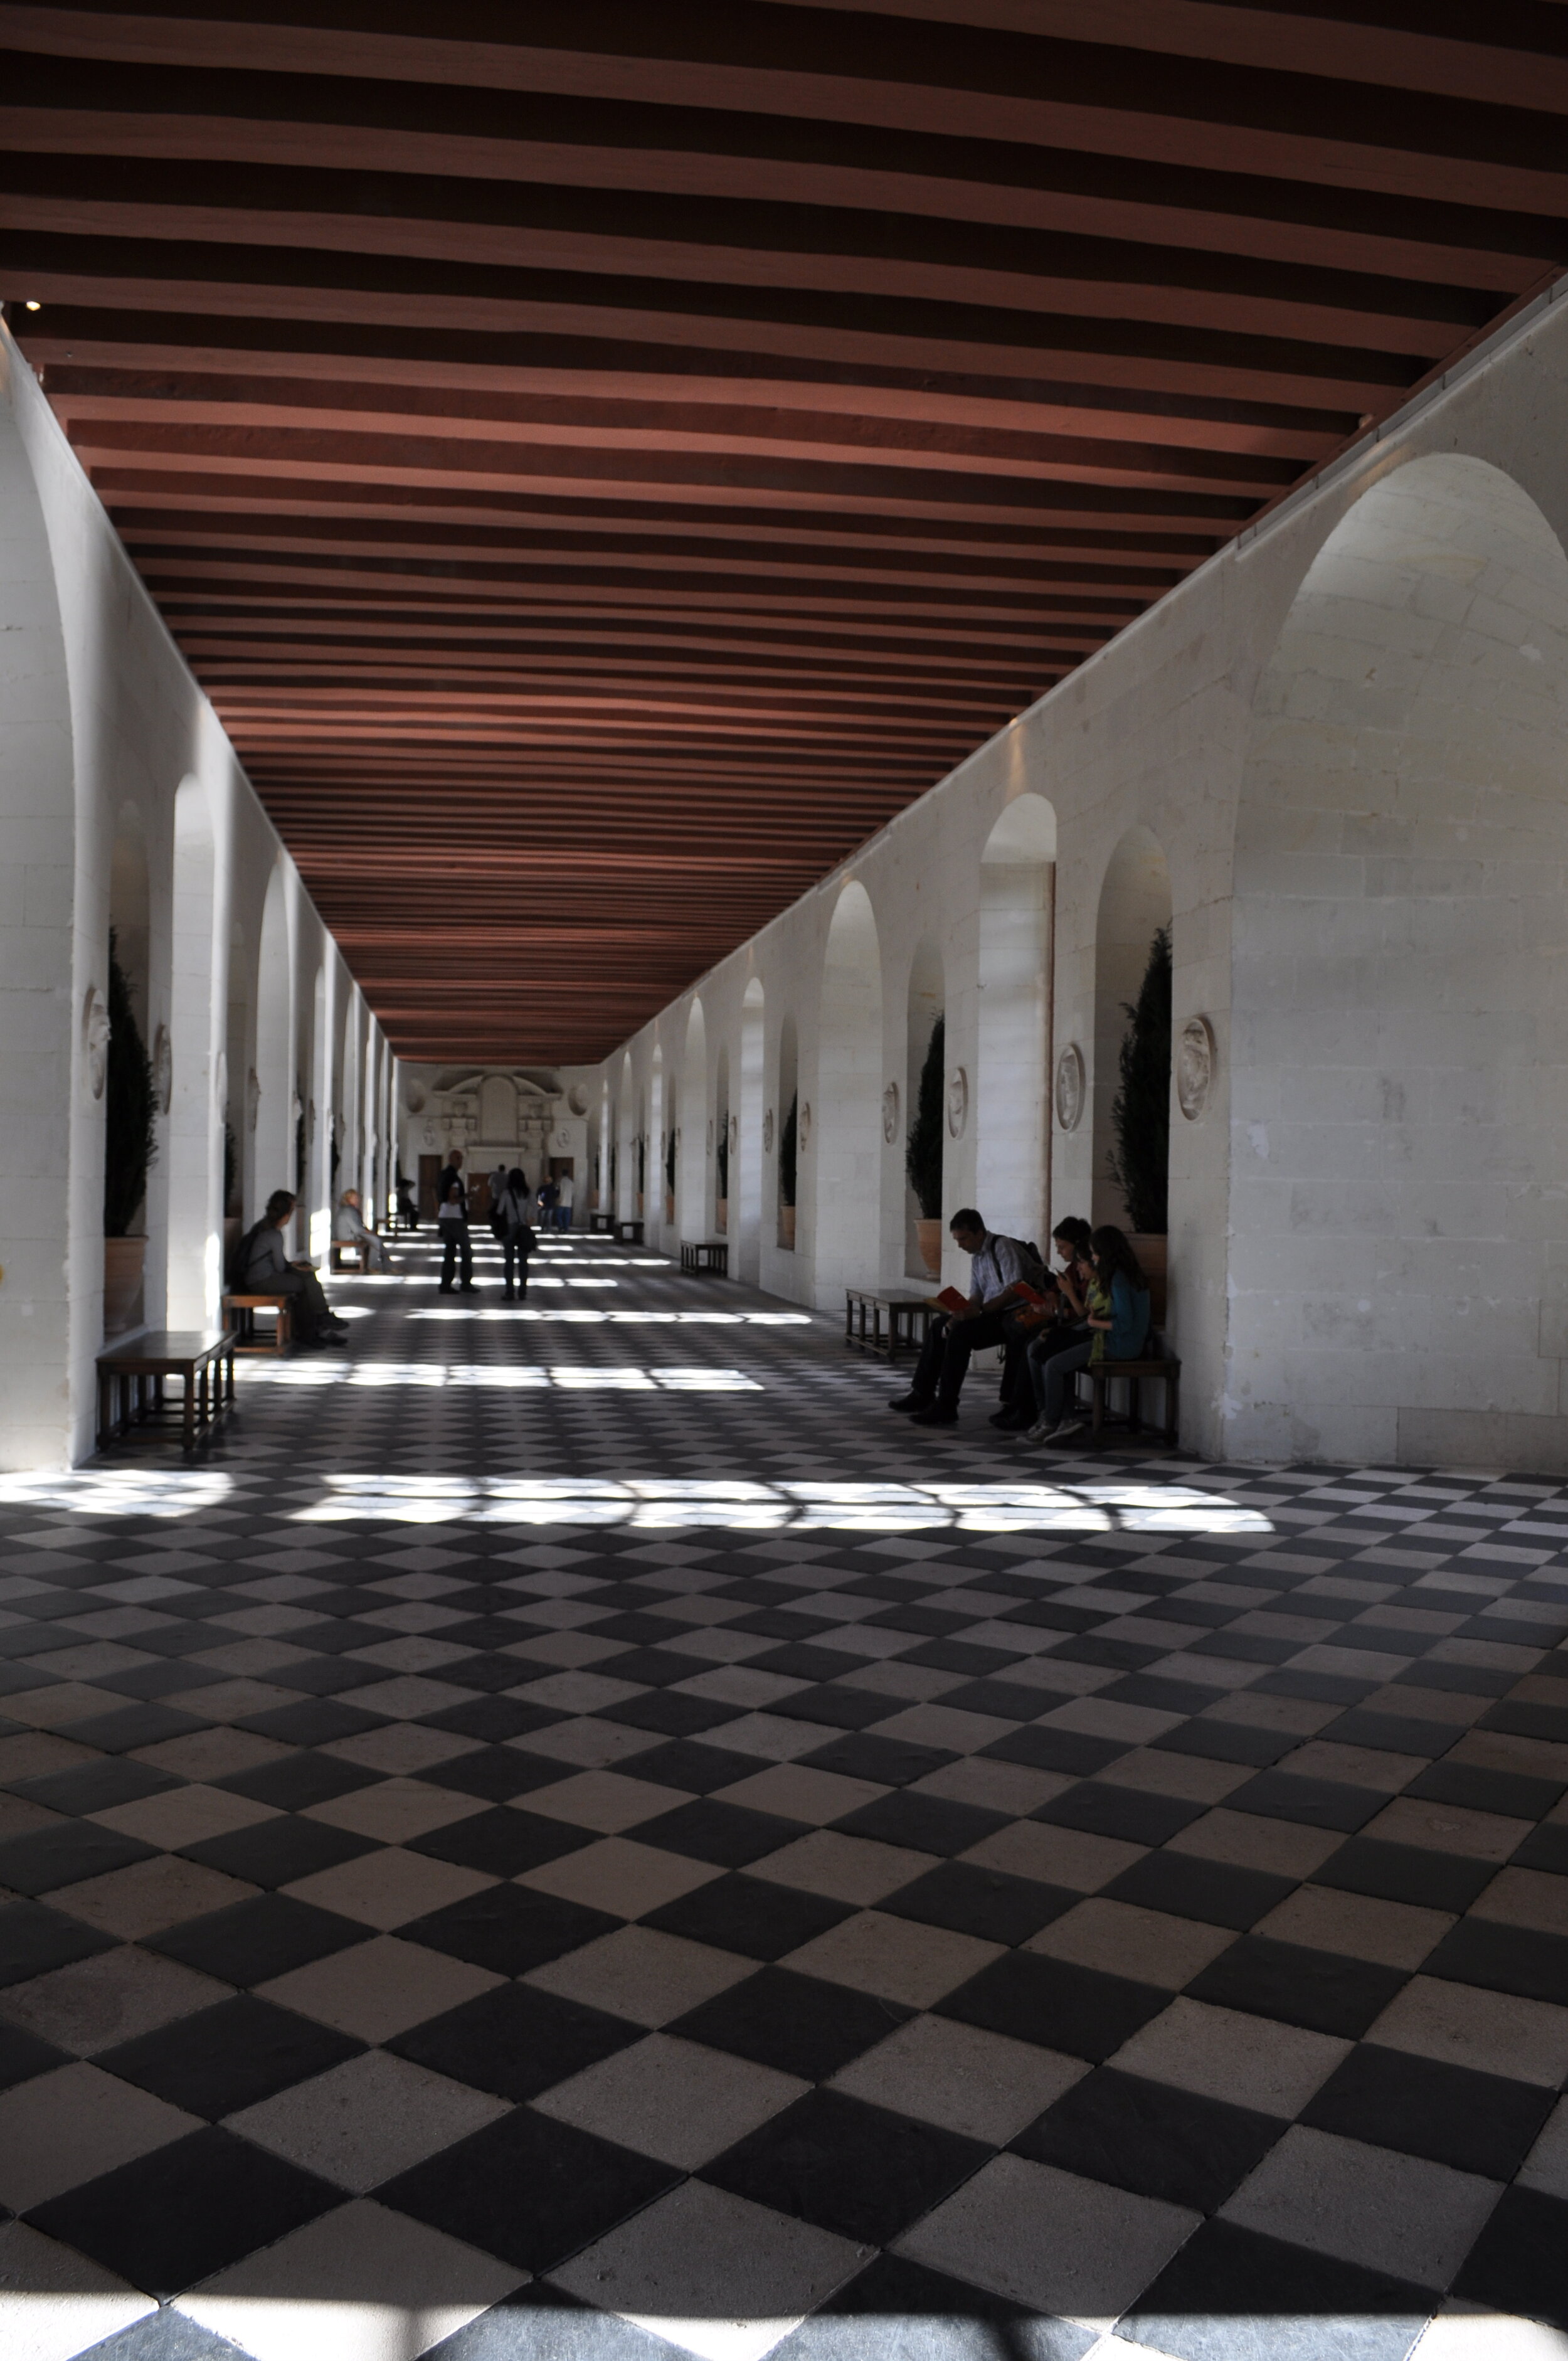 The gallery at Chenonceau, also used as a ballroom, with tufa and slate-tile floor